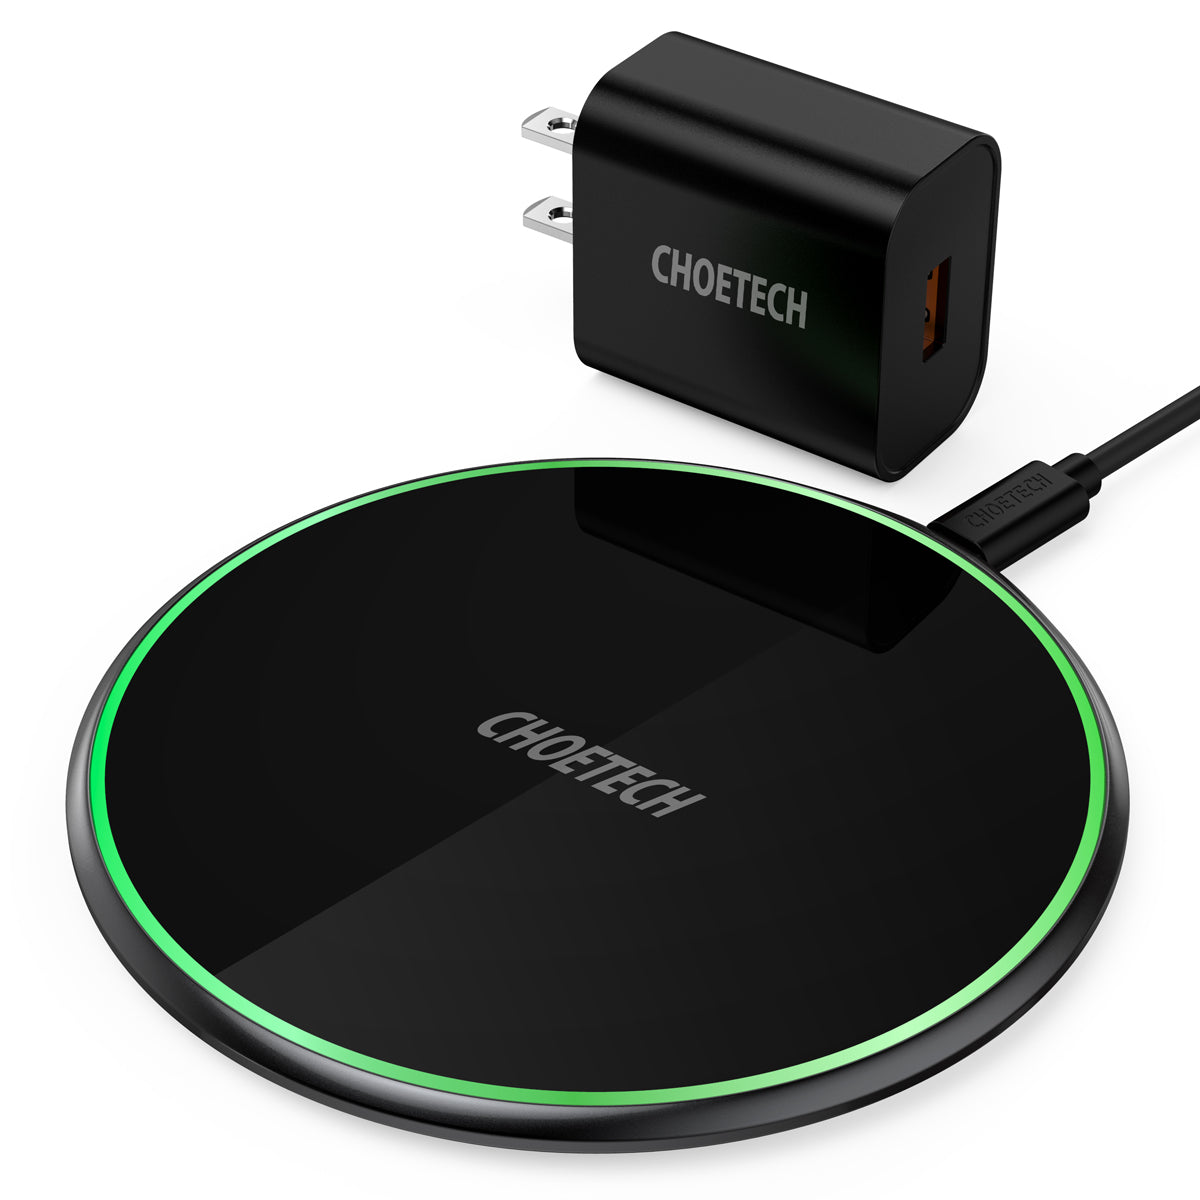 T559-F CHOETECH USB-C 15W Wireless Charger, Zinc Alloy Glass Wireless Charging Pad with Adapter Compatible LG V30/V35/G8,iPhone 11/11 Pro Max/Xs Max/XR/X,Galaxy Note 10/S20/S20+,AirPods Pro,Pixel 3/4XL